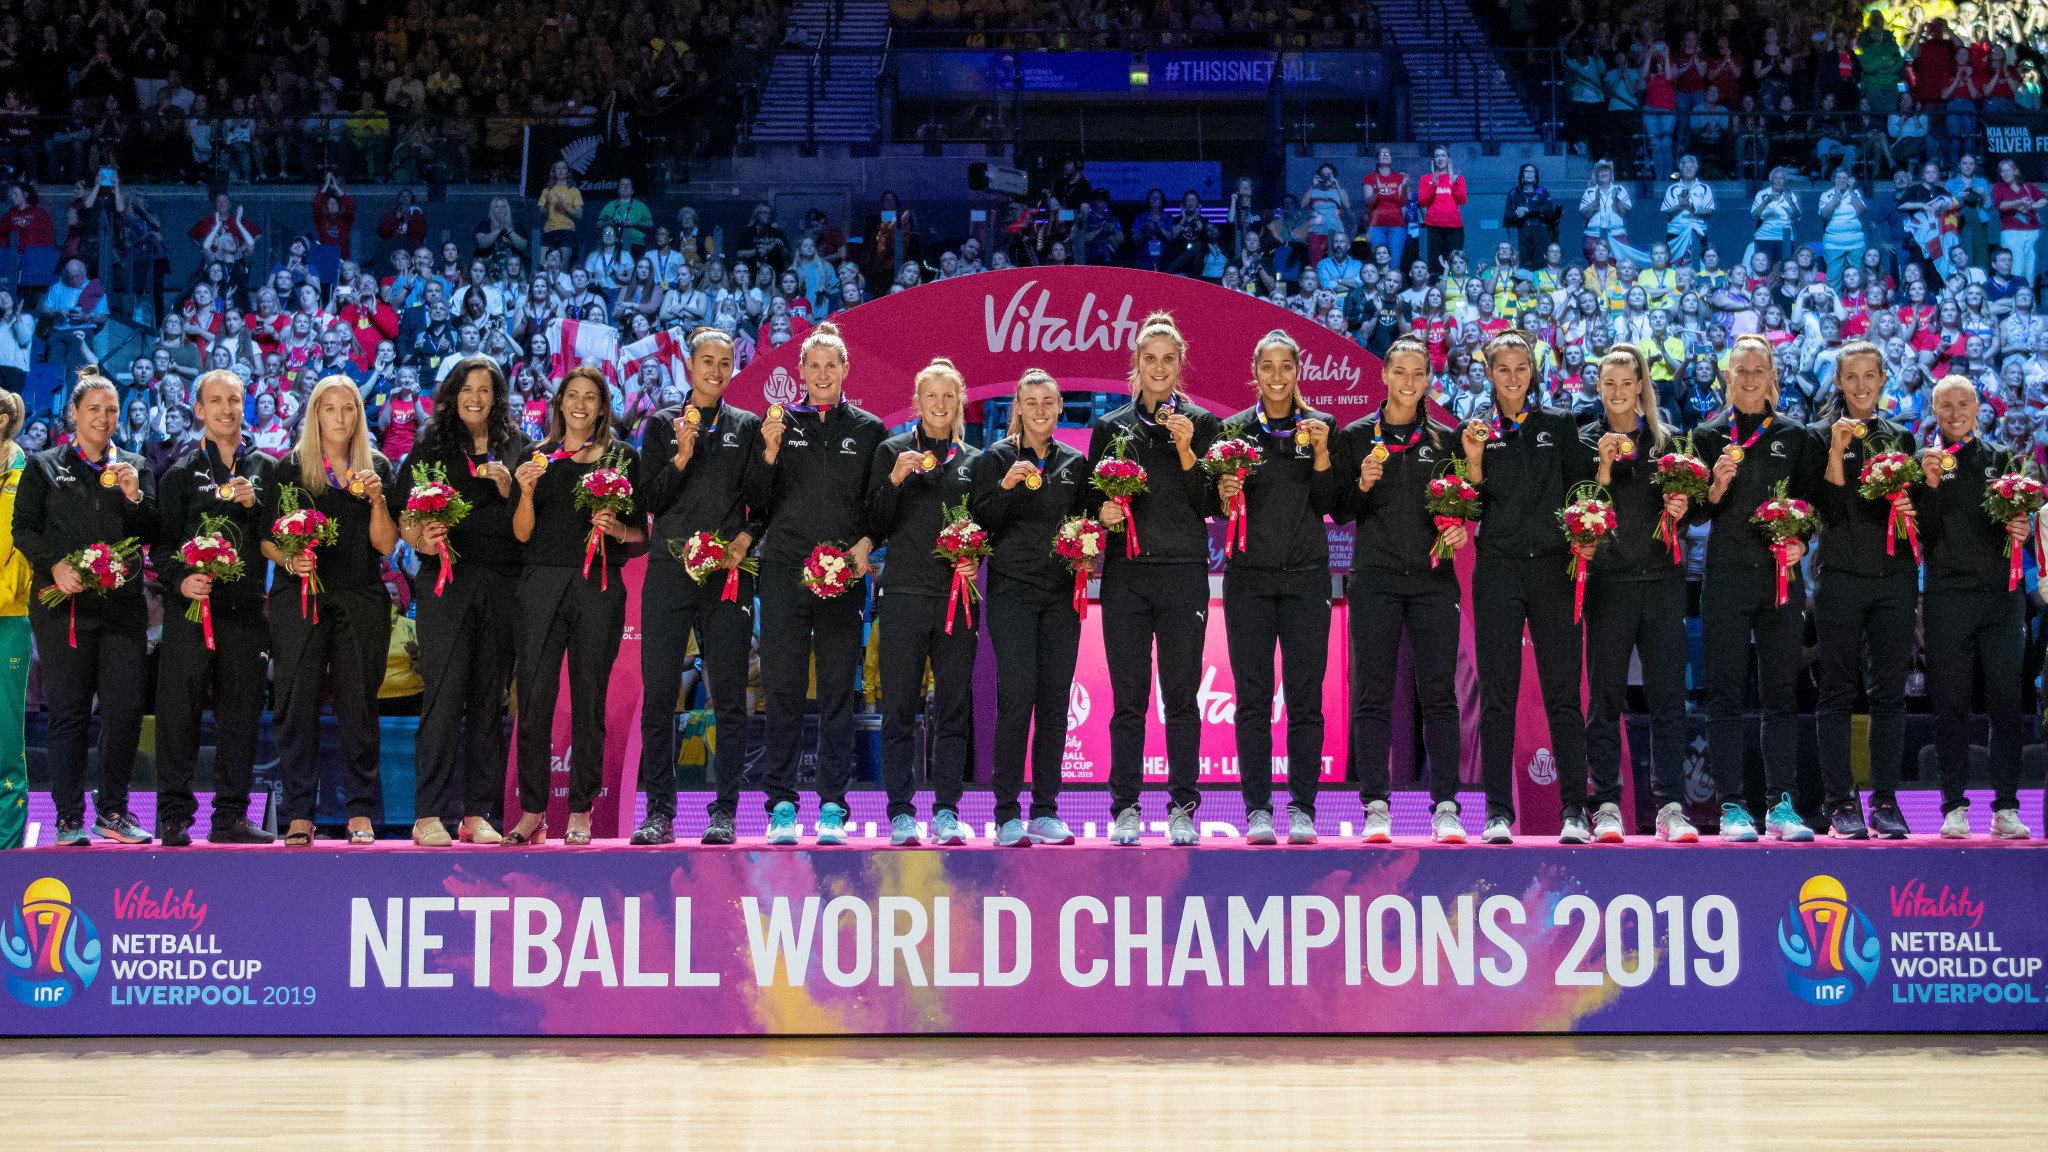 Lindsay Impett was event director at the 2019 Netball World Cup in Liverpool - an event hailed as a huge success ©Getty Images